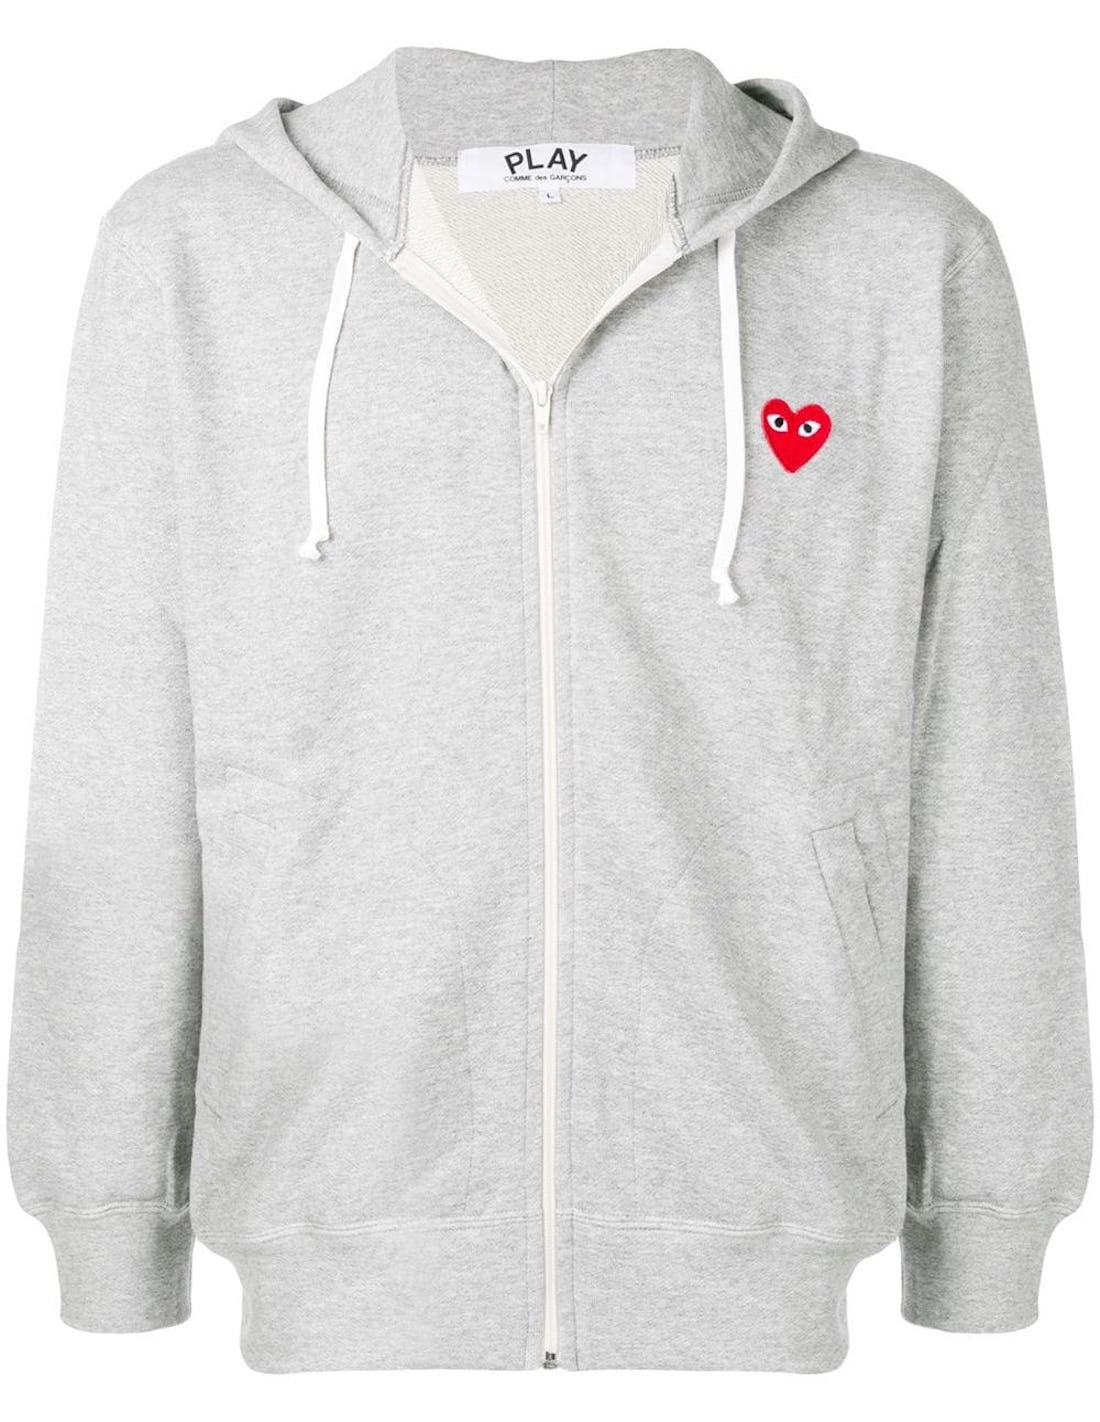 COMME DES GARCONS PLAY zipped hoodie in grey cotton with hearts on the back